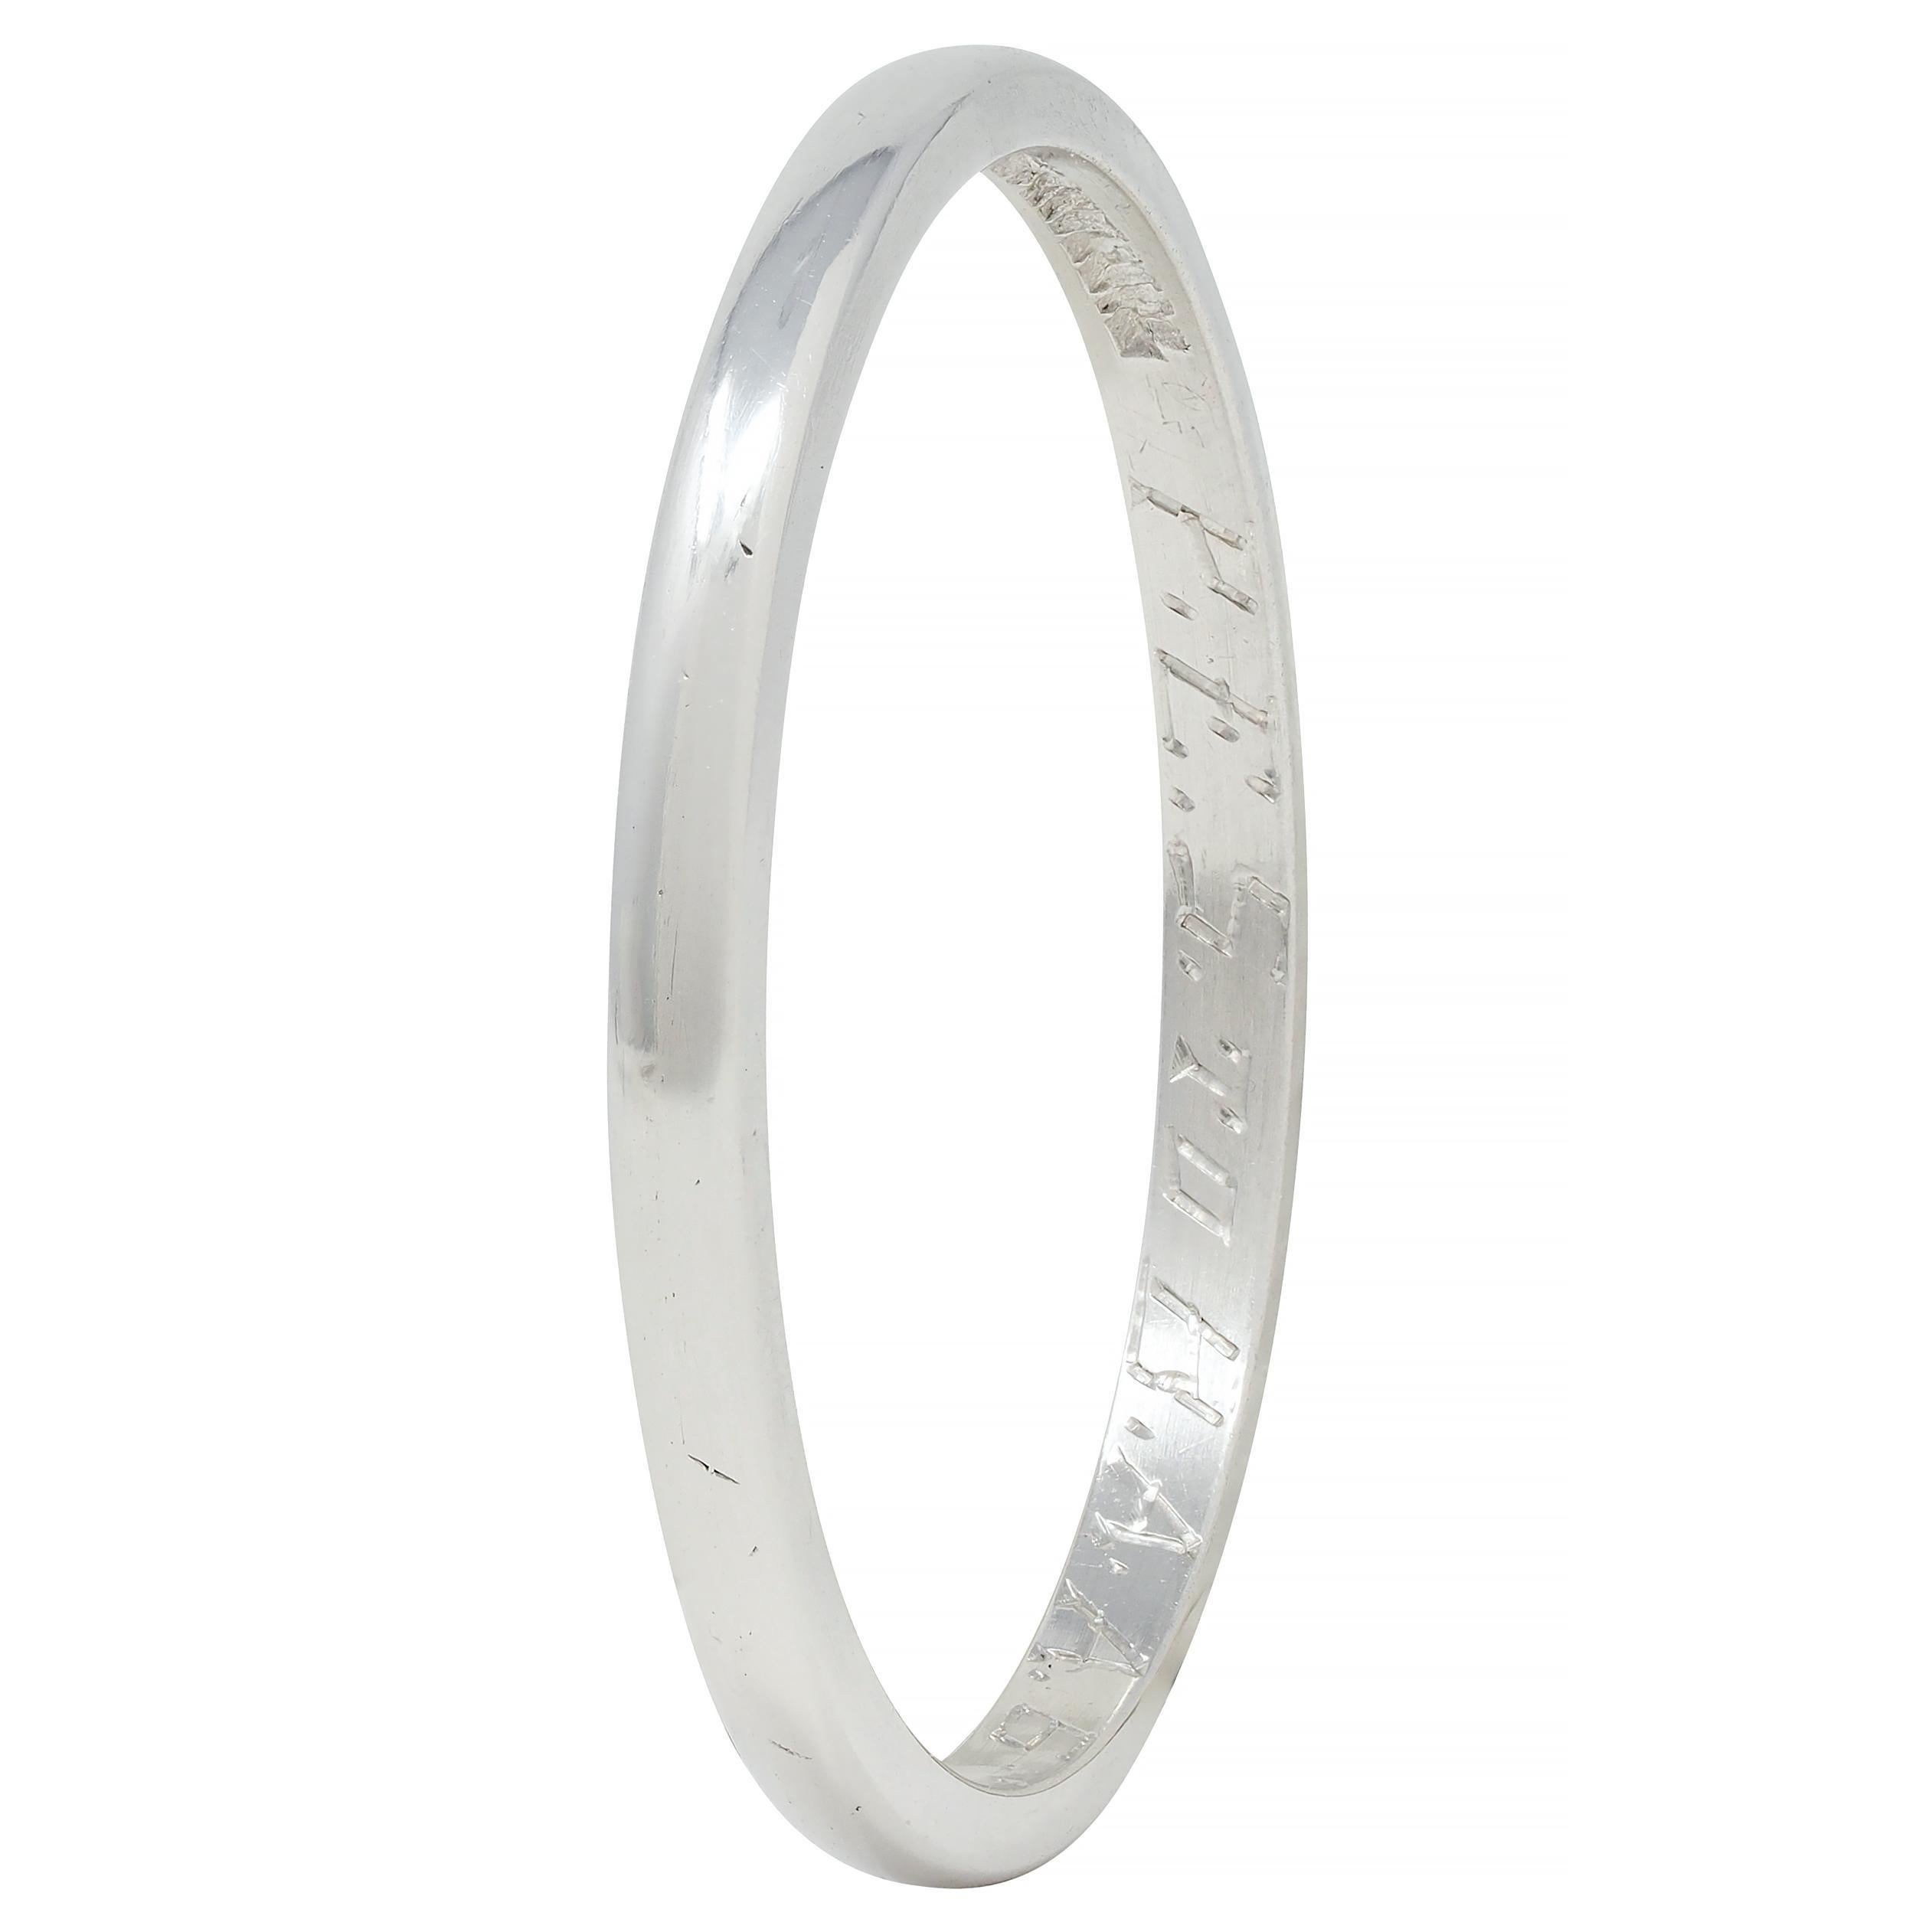 Designed as a sleek minimal band 
Featuring squared off edges
With high polish finish
'Inscribed P.E.S. to B.A.A. 6-25-23'
Tested as platinum
Fully signed for Tiffany & Co.
Circa: 1923; via dated inscription
Ring size: 7 1/2 and sizable with